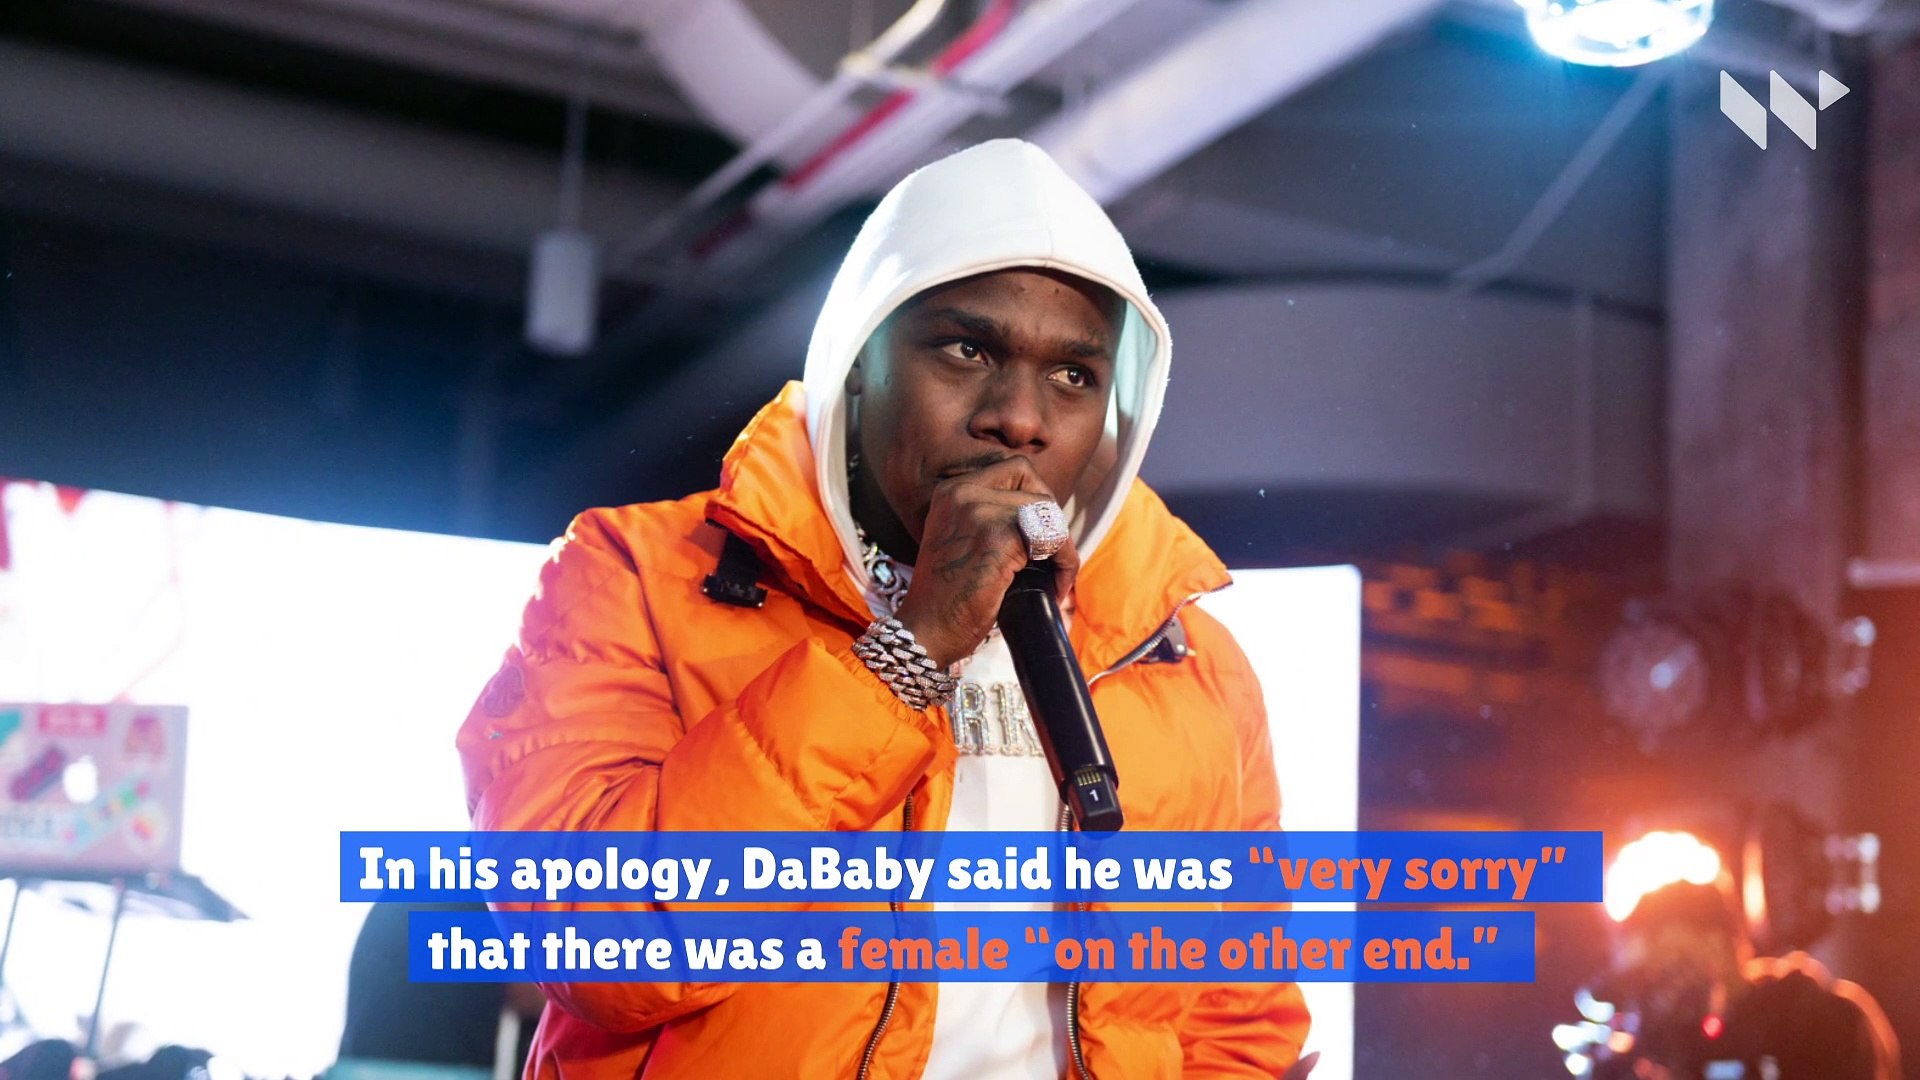 DaBaby Issues Apology for Assaulting Female Fan